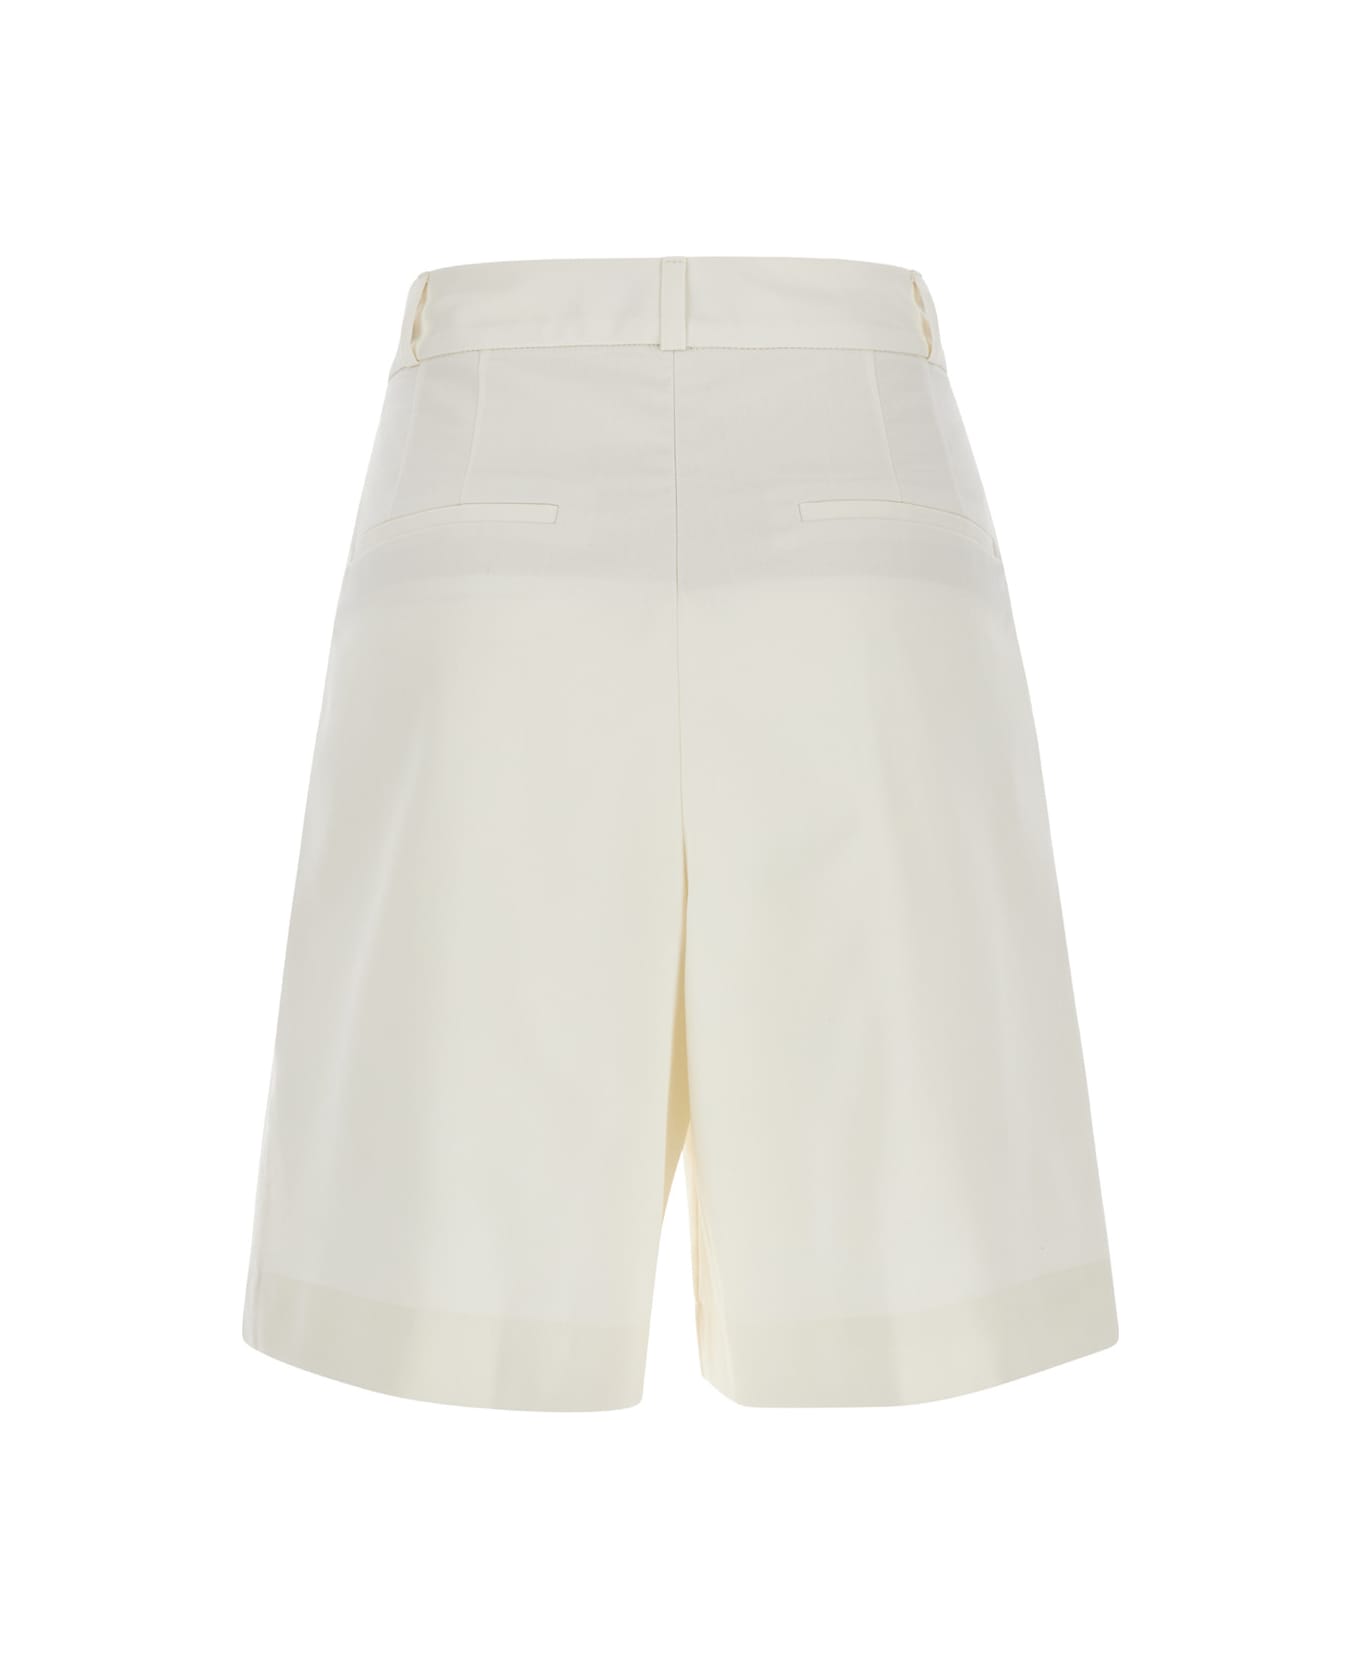 Róhe White Tailored Shorts In Wool Woman - White ボトムス